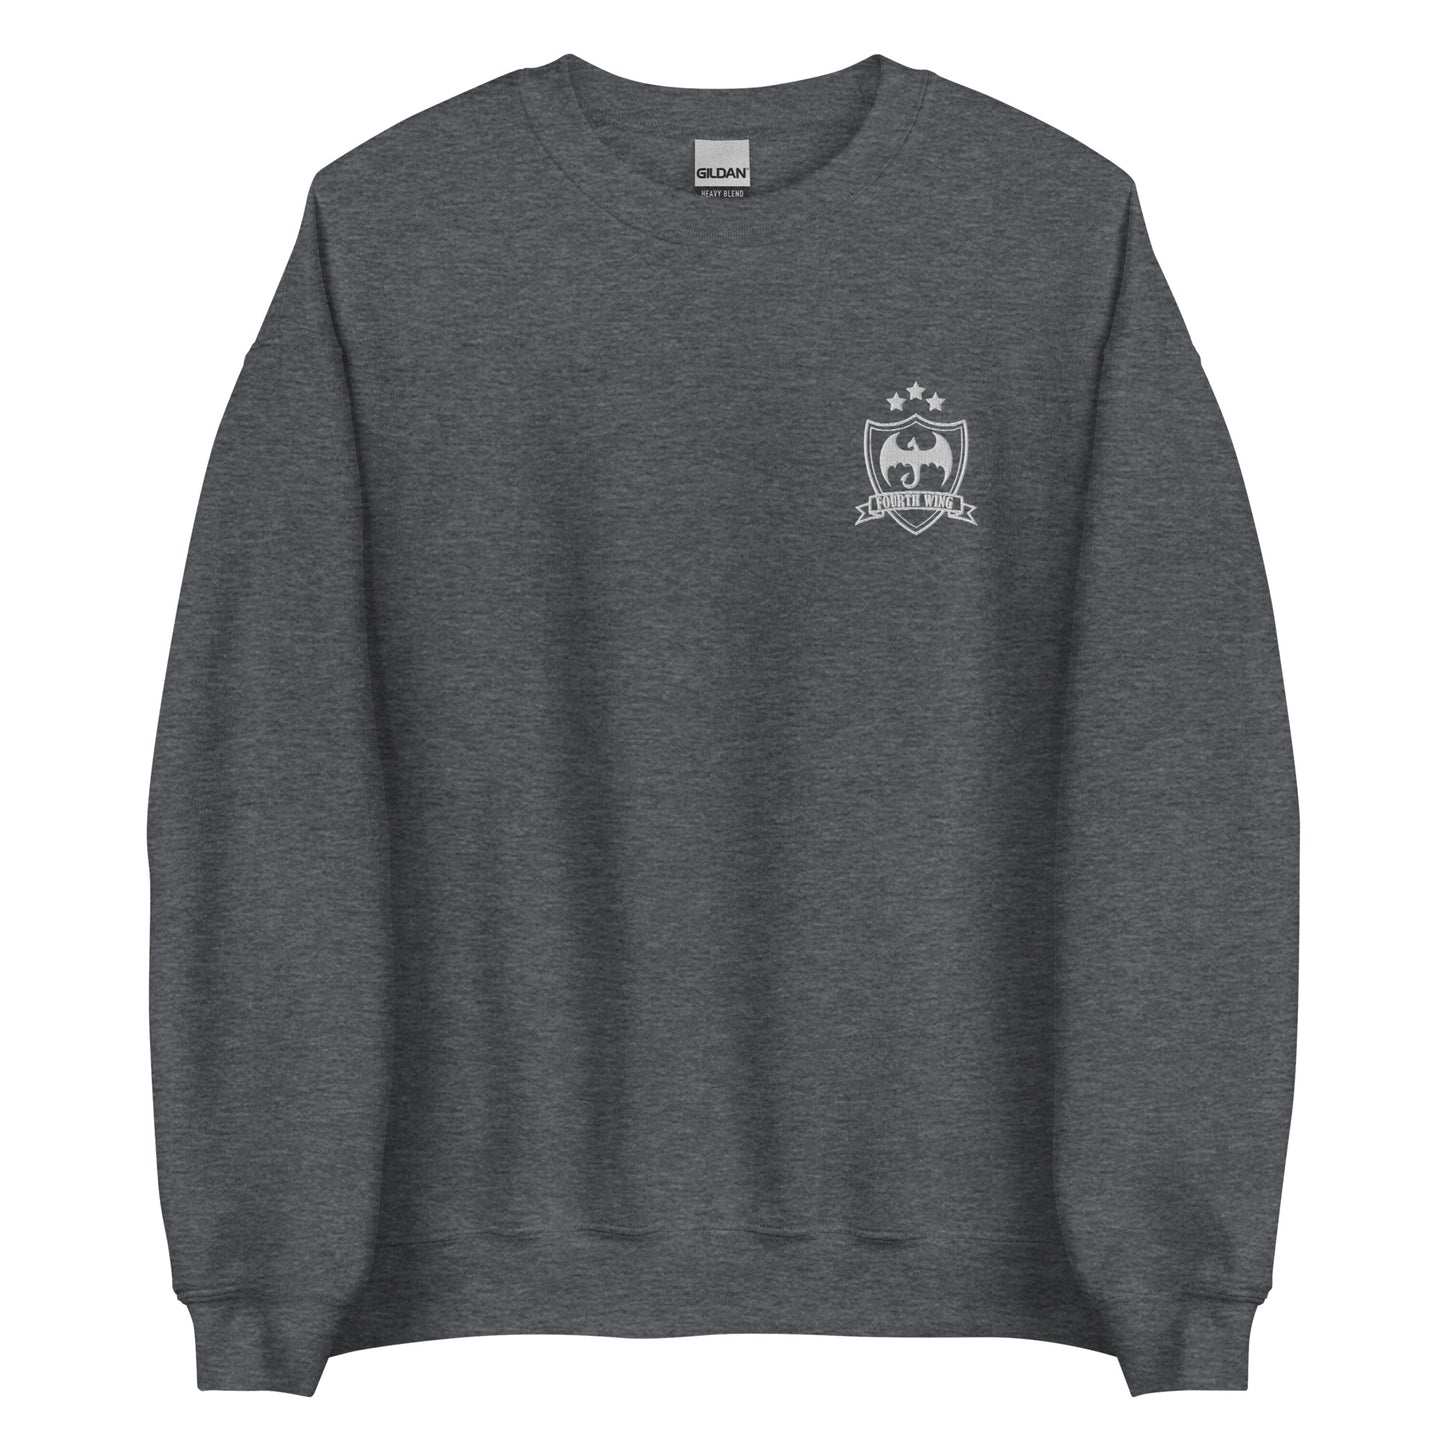 Embroidered Xaden Riorson Sweatshirt with White Lettering